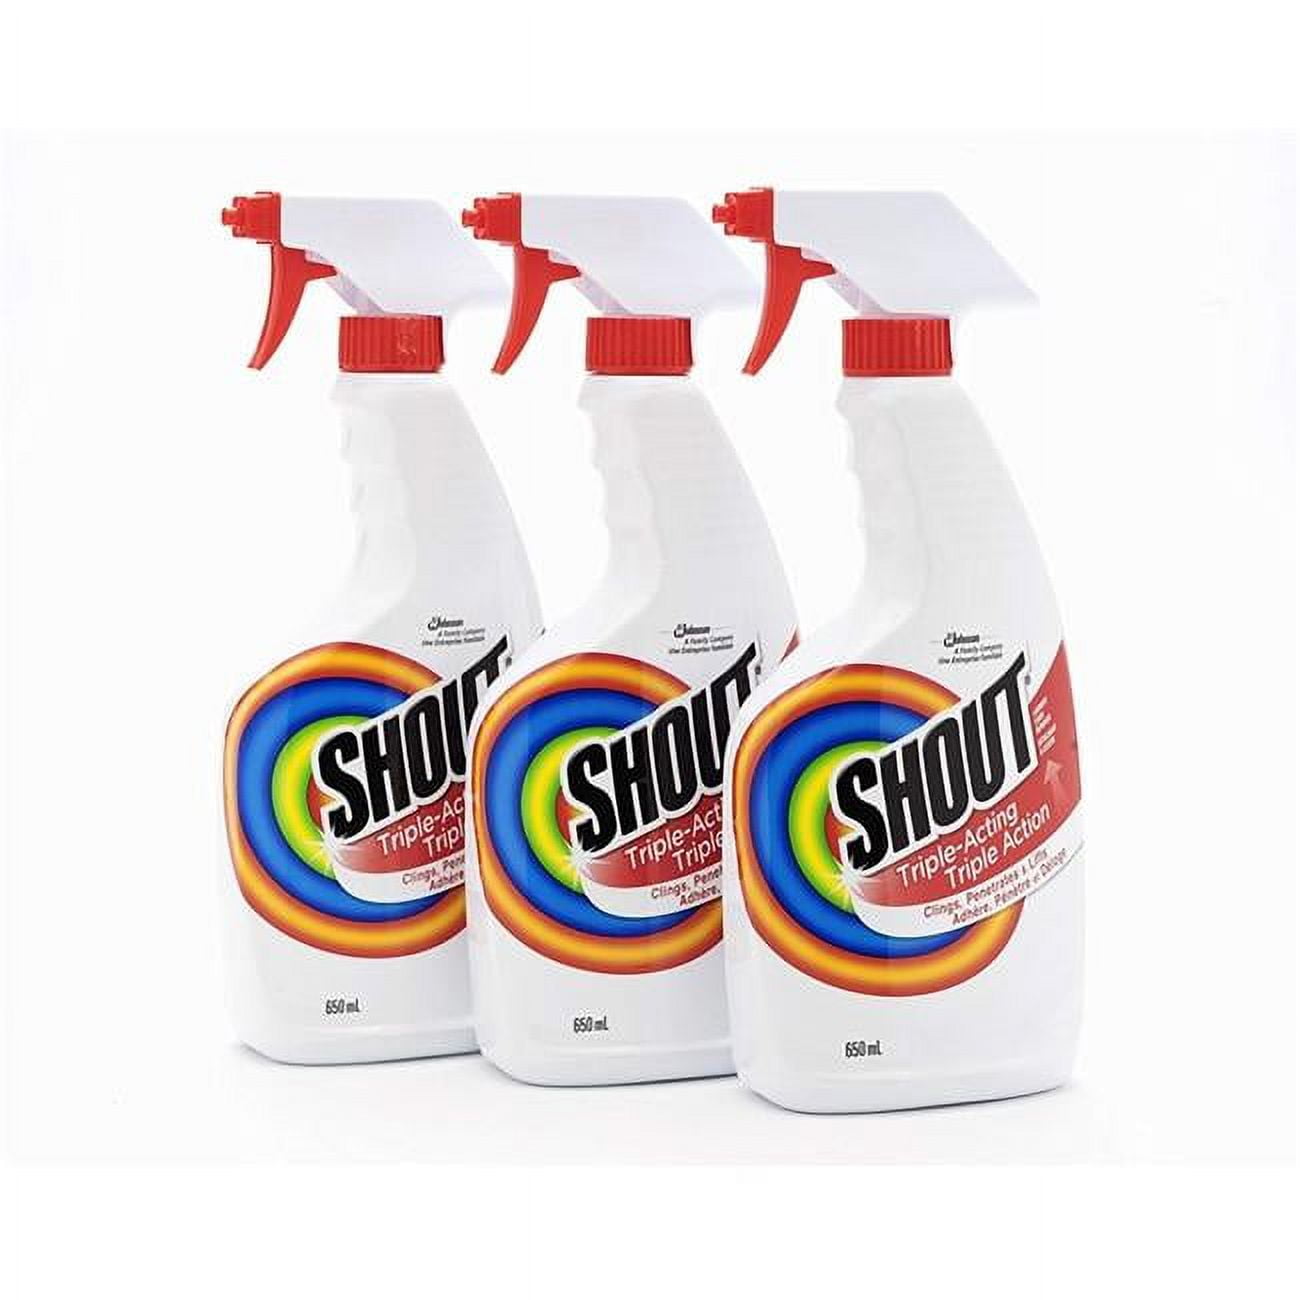 SC Johnson Shout® 359549 22 oz. Triple-Acting Laundry Stain Remover Spray -  8/Case